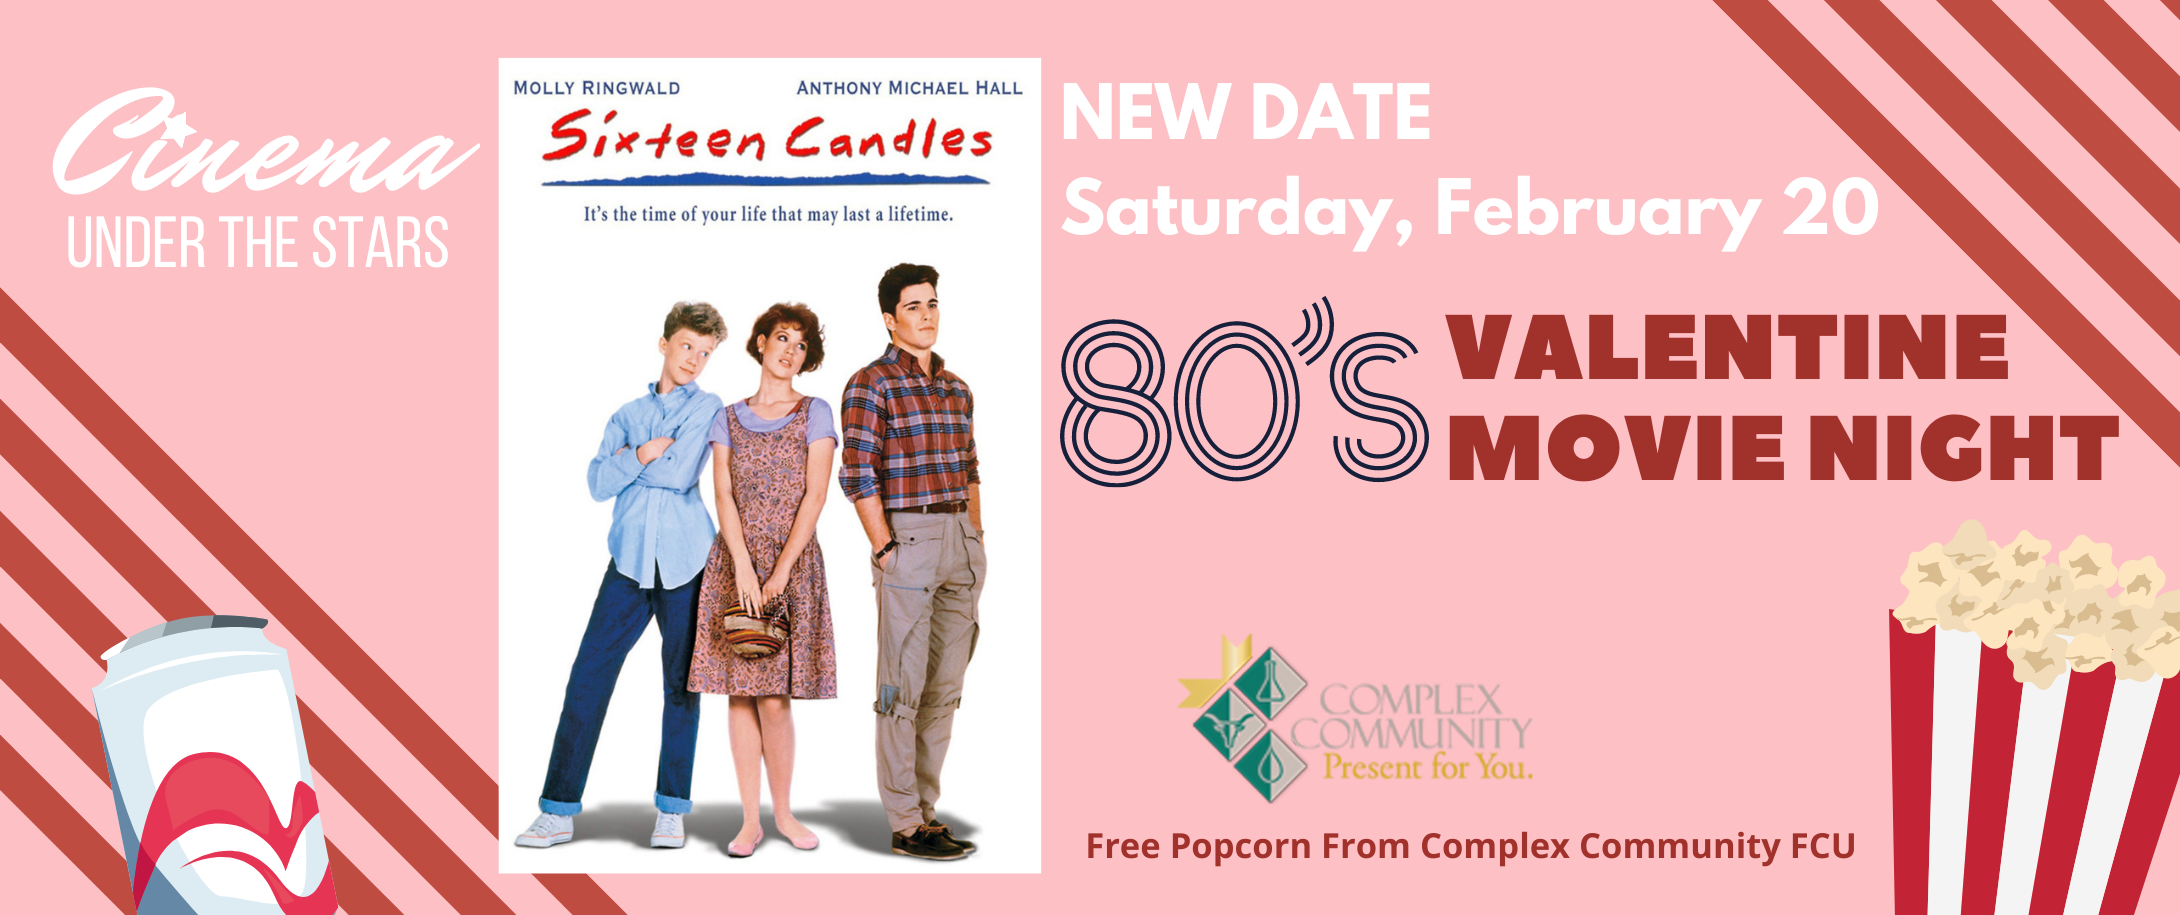 NEW DATE - Cinema Under the Stars - Sixteen Candles